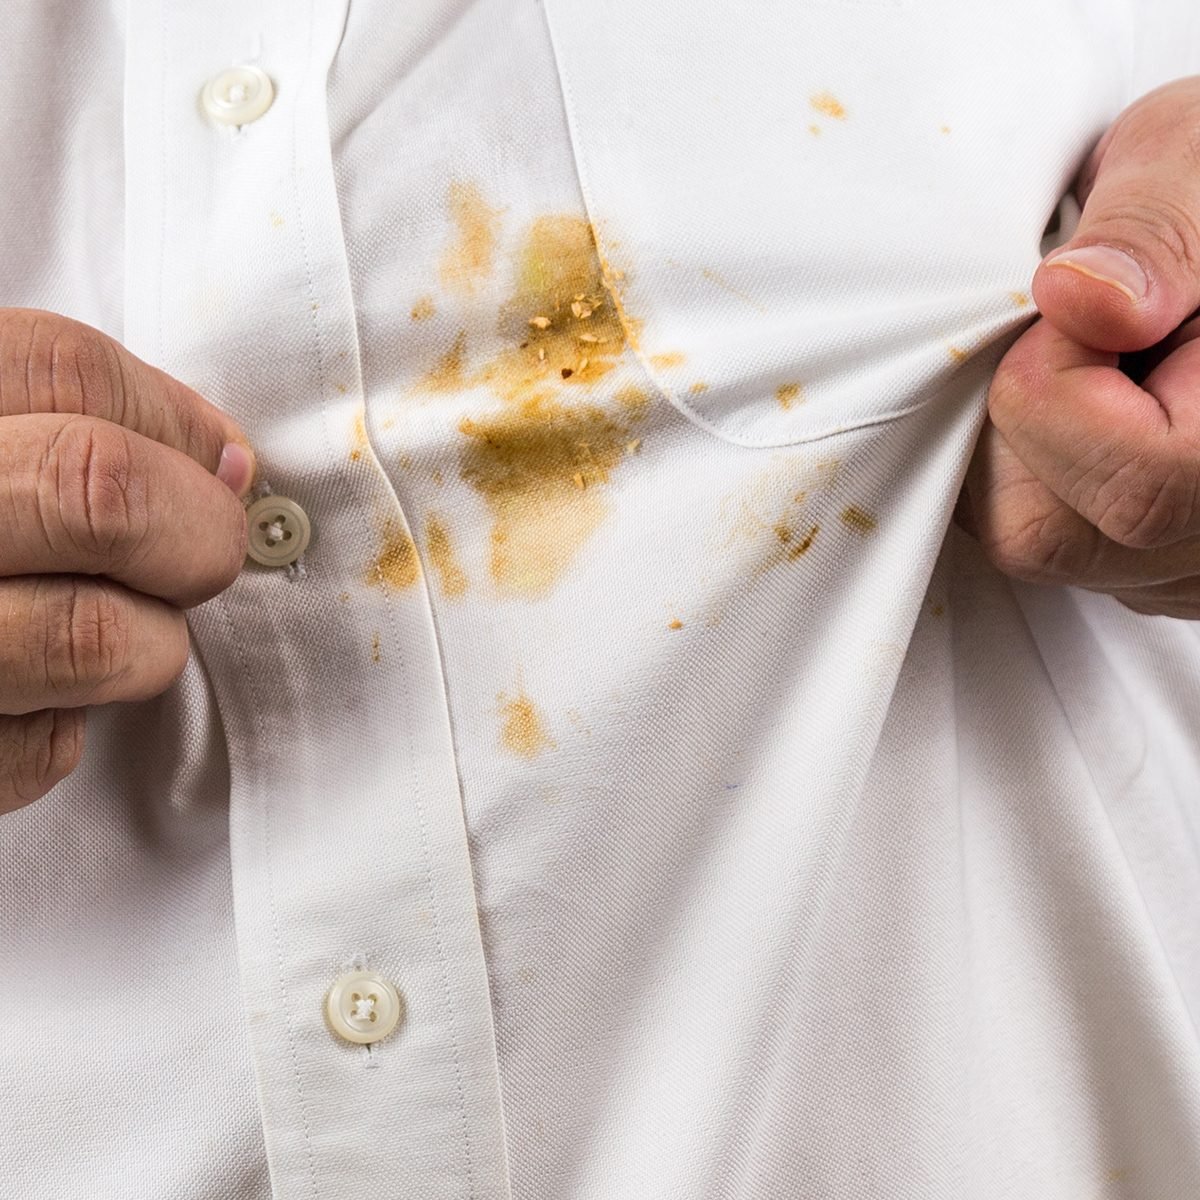 Frustrated person pointing to spilled curry stain on white shirt; Shutterstock ID 1017782002; Job (TFH, TOH, RD, BNB, CWM, CM): TOH